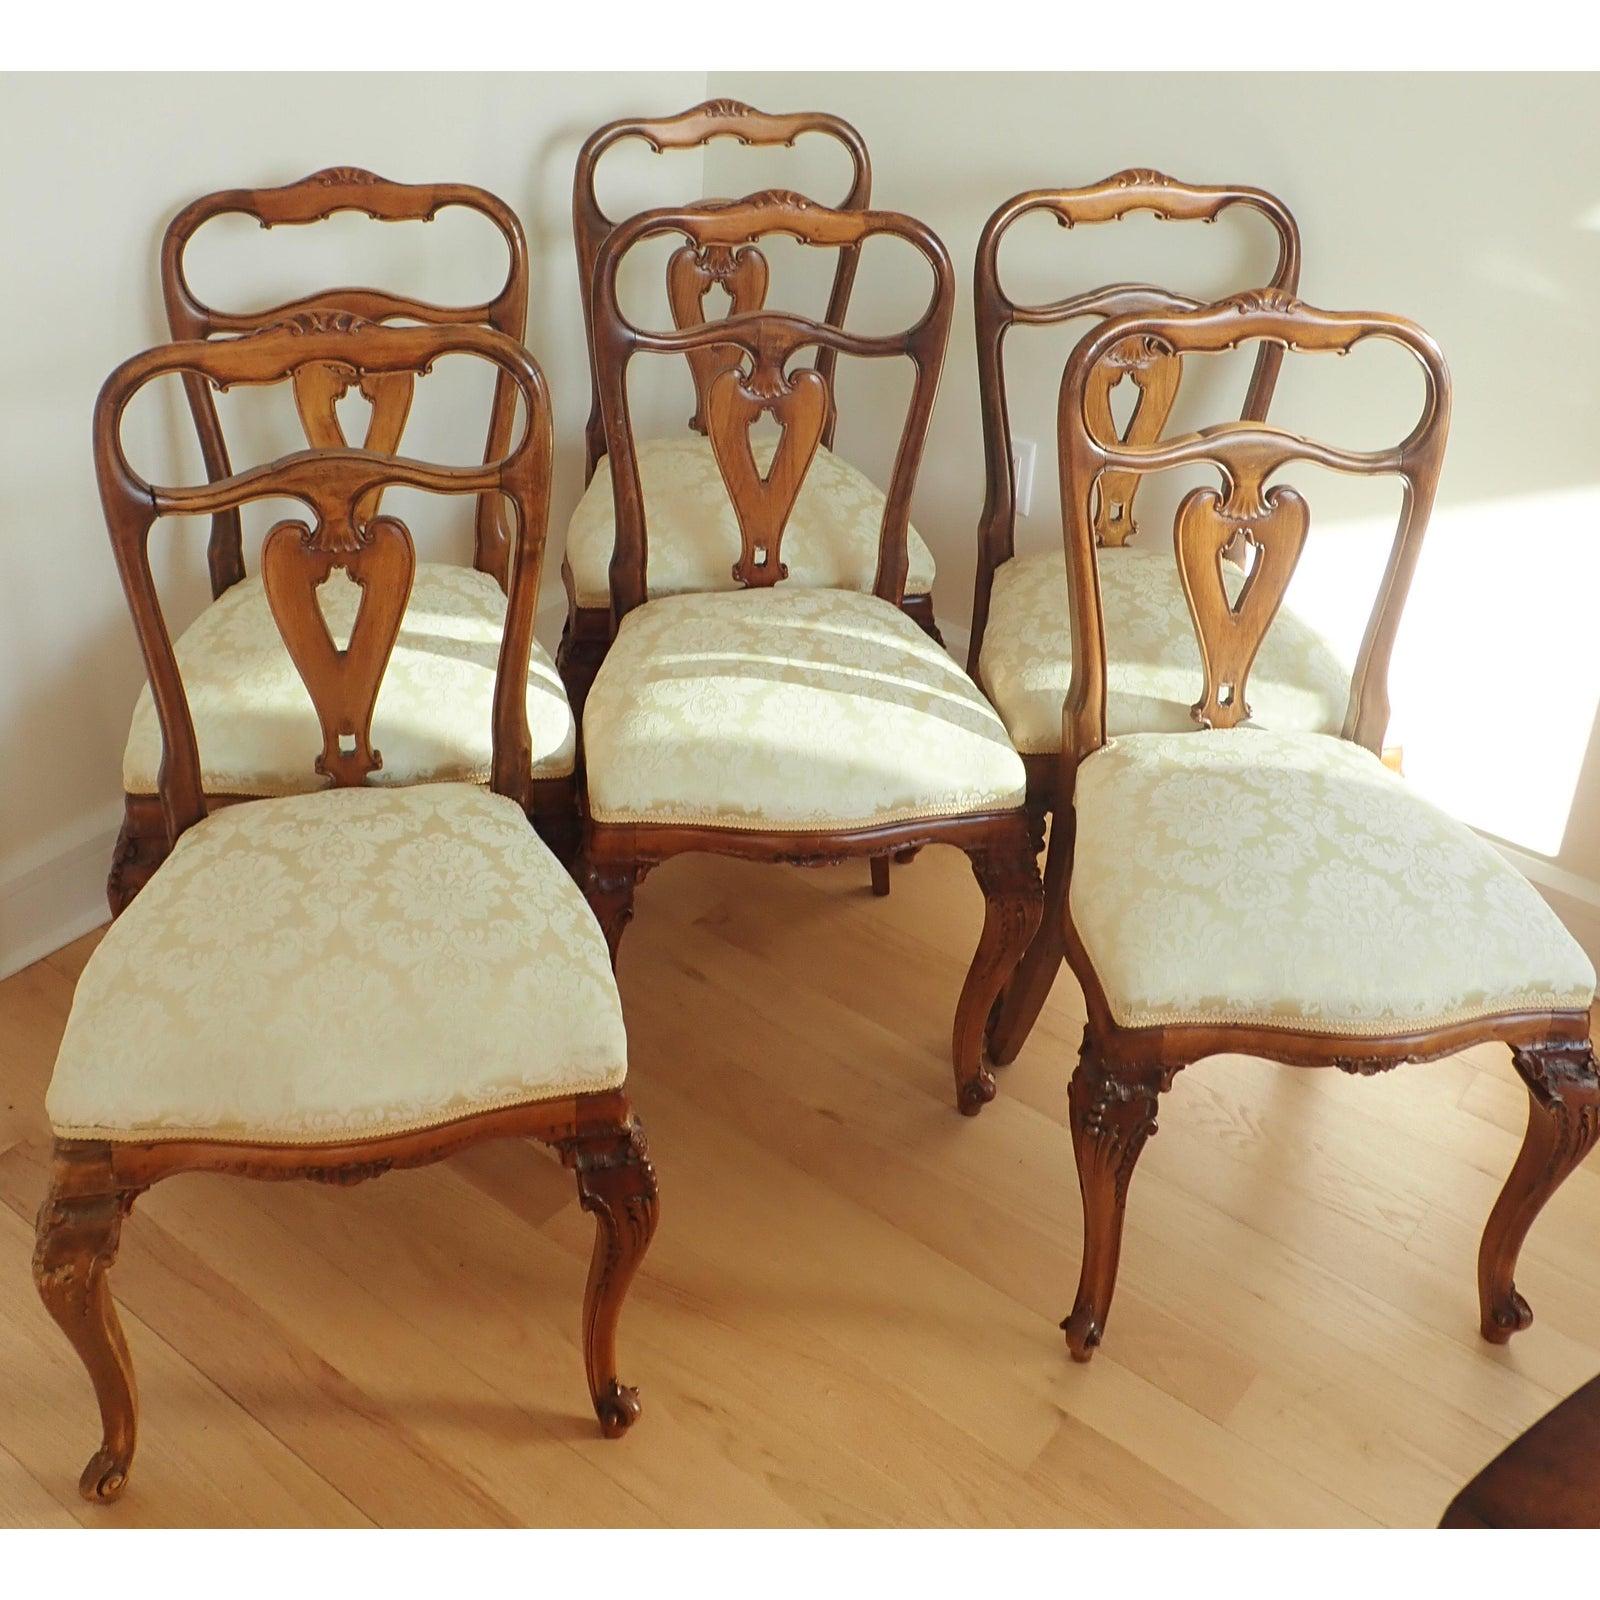 Set of 6 Italian Walnut  Rococo Dining Room Chairs
Hand carved walnut . 19th Century.
Later damask upholstery.
